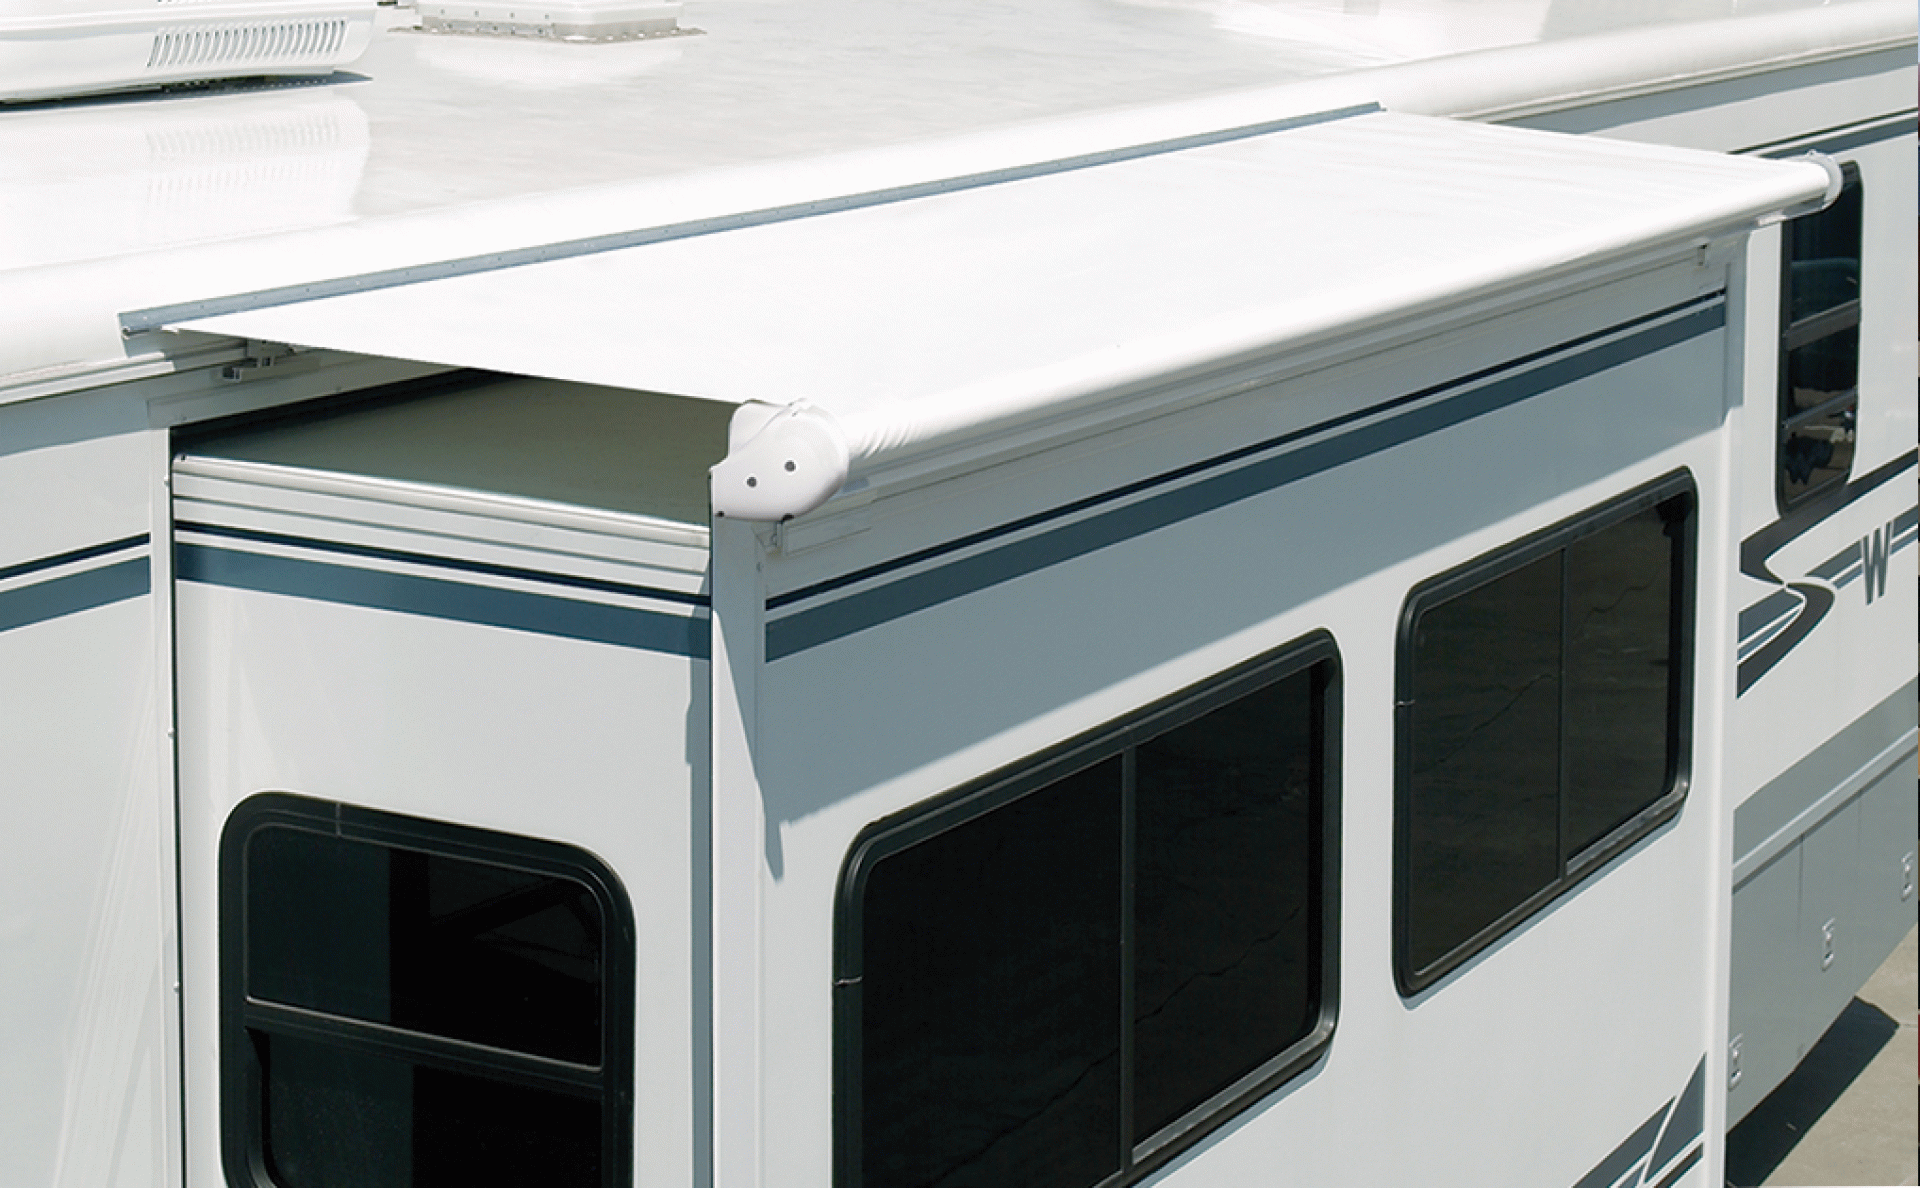 CAREFREE OF COLORADO | UQ1210025 | SIDEOUT KOVER III AWNING 118" - 121" ROOF RANGE WHITE VINYL FABRIC & DEFLECTOR